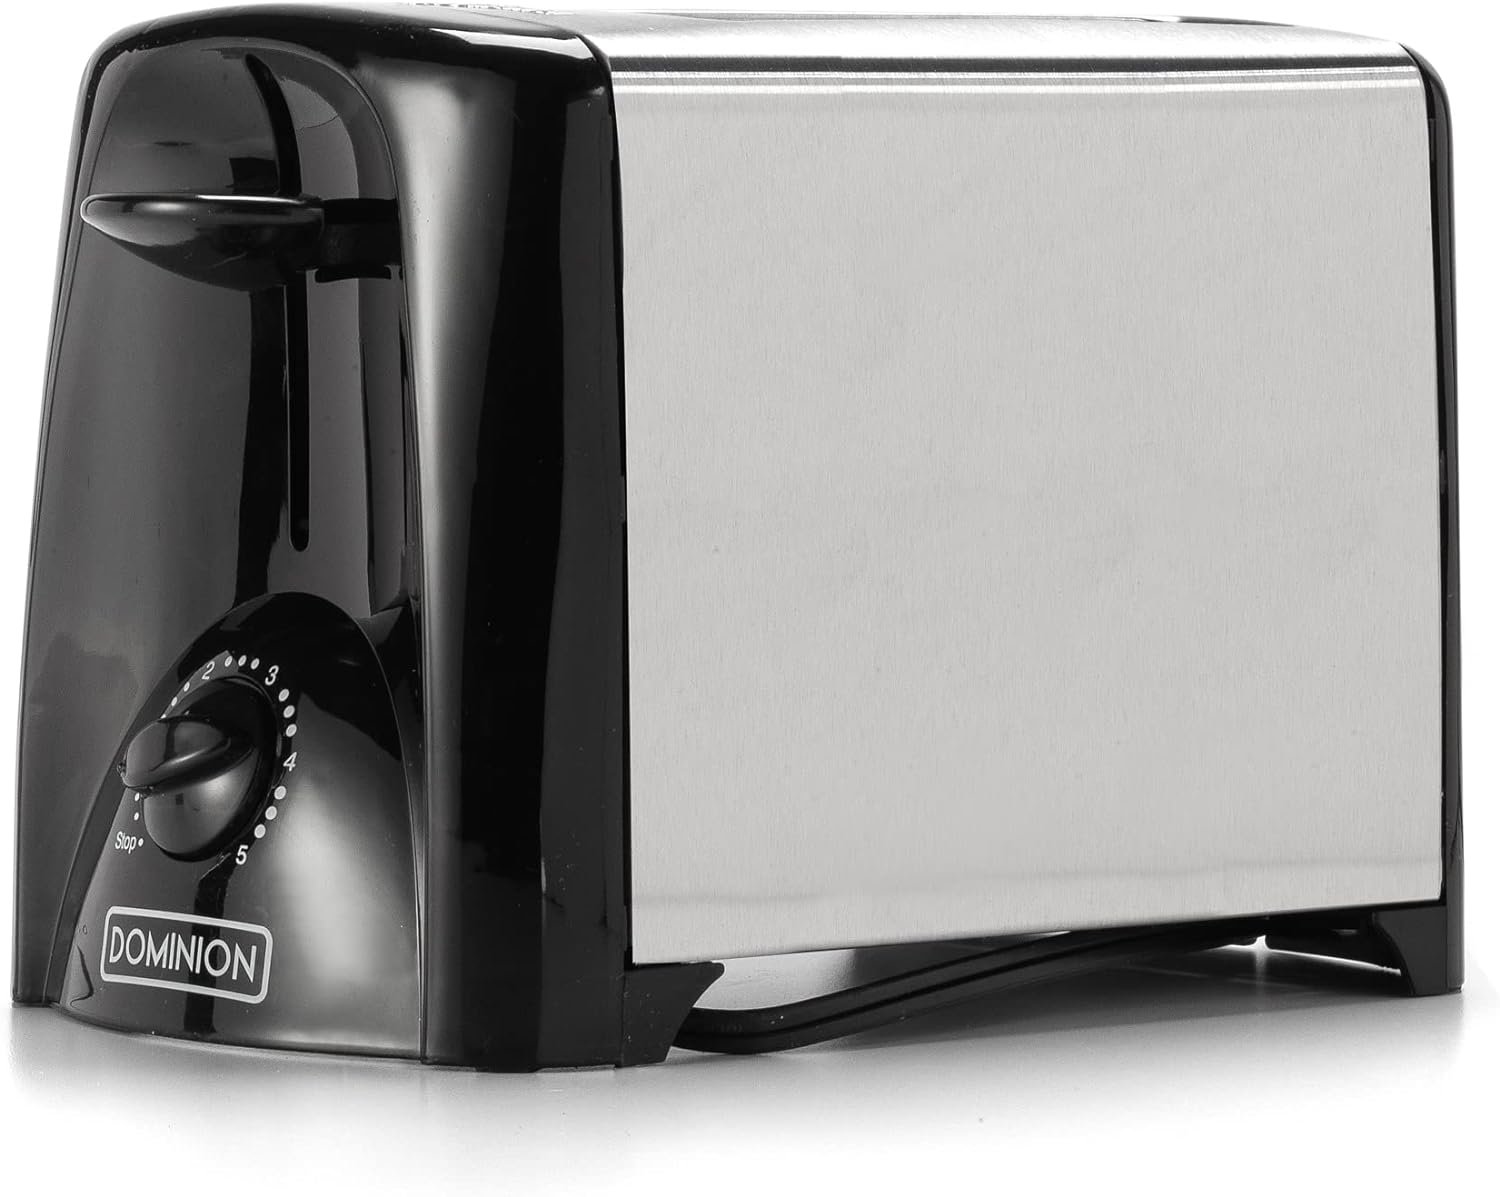 Dominion 2-Slice Toaster with Shade Control, Slide-Out Crumb Tray, Auto-Shutoff, Toast Lift, Brushed Stainless Steel/Black